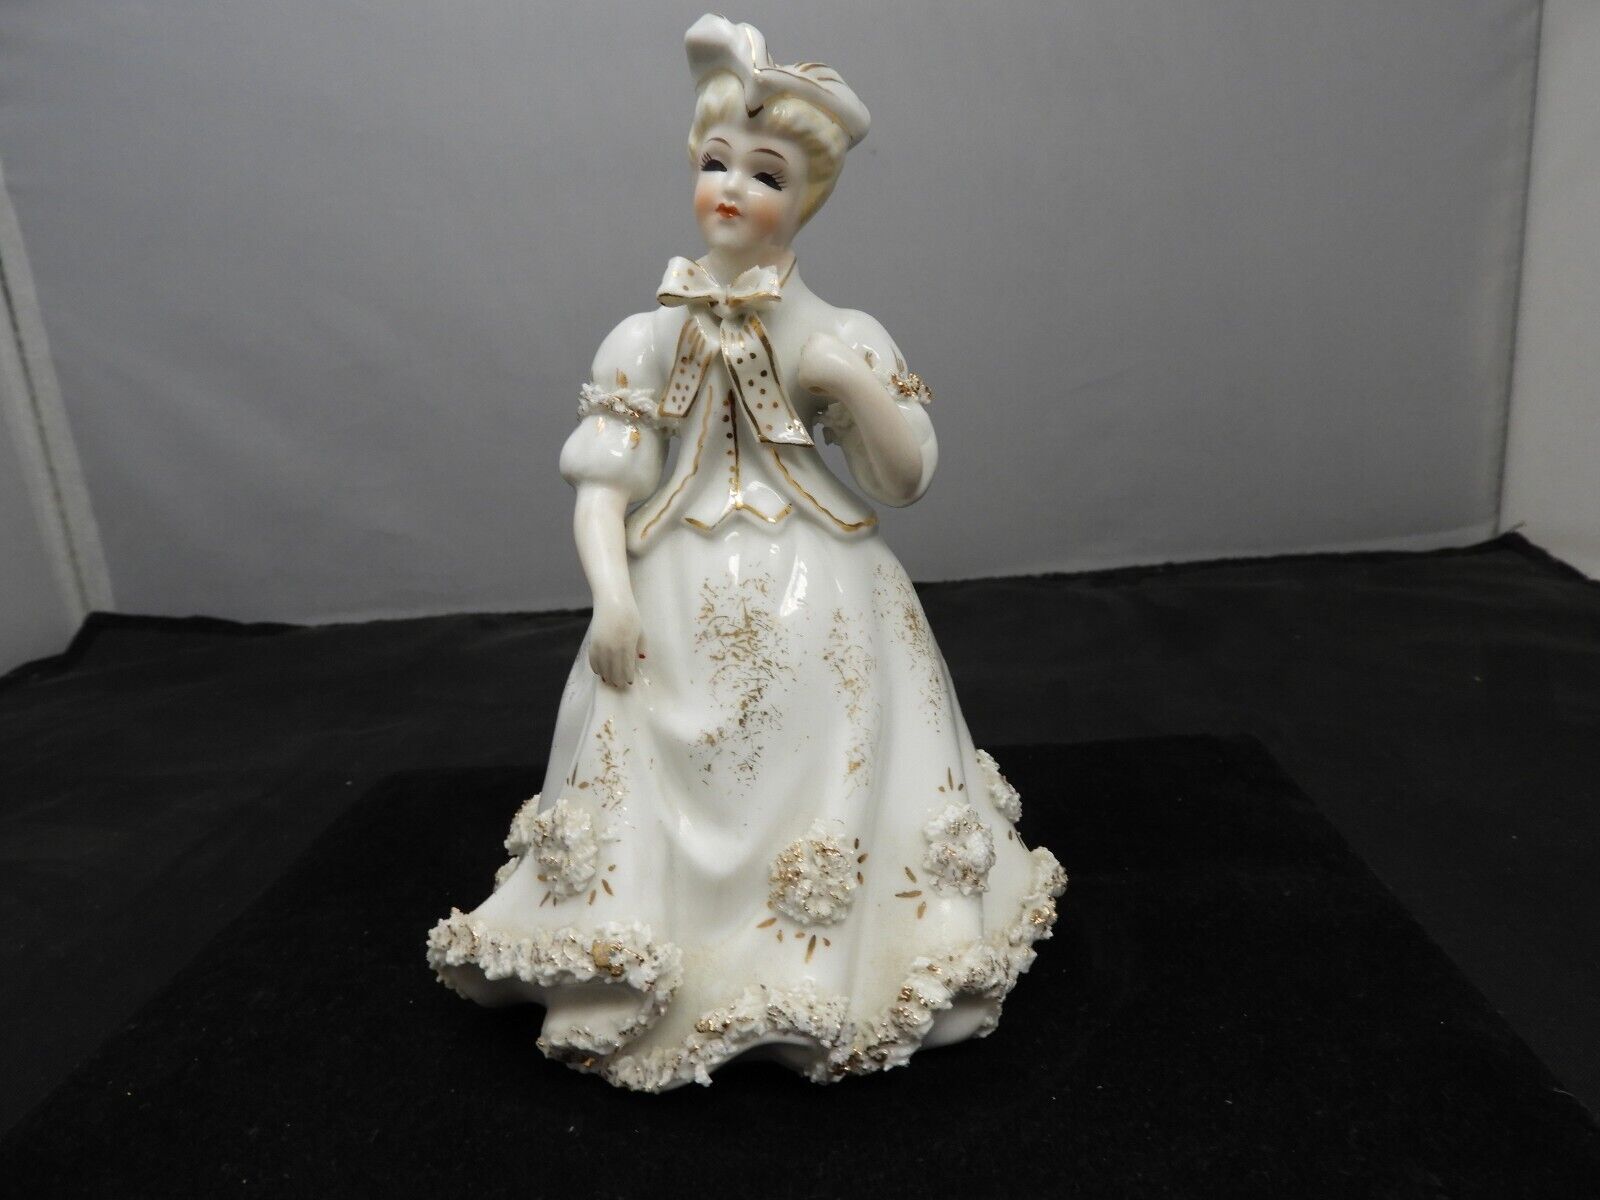 Vintage Lefton China Victorian Lady Figure ,Hand Painted K8570-W